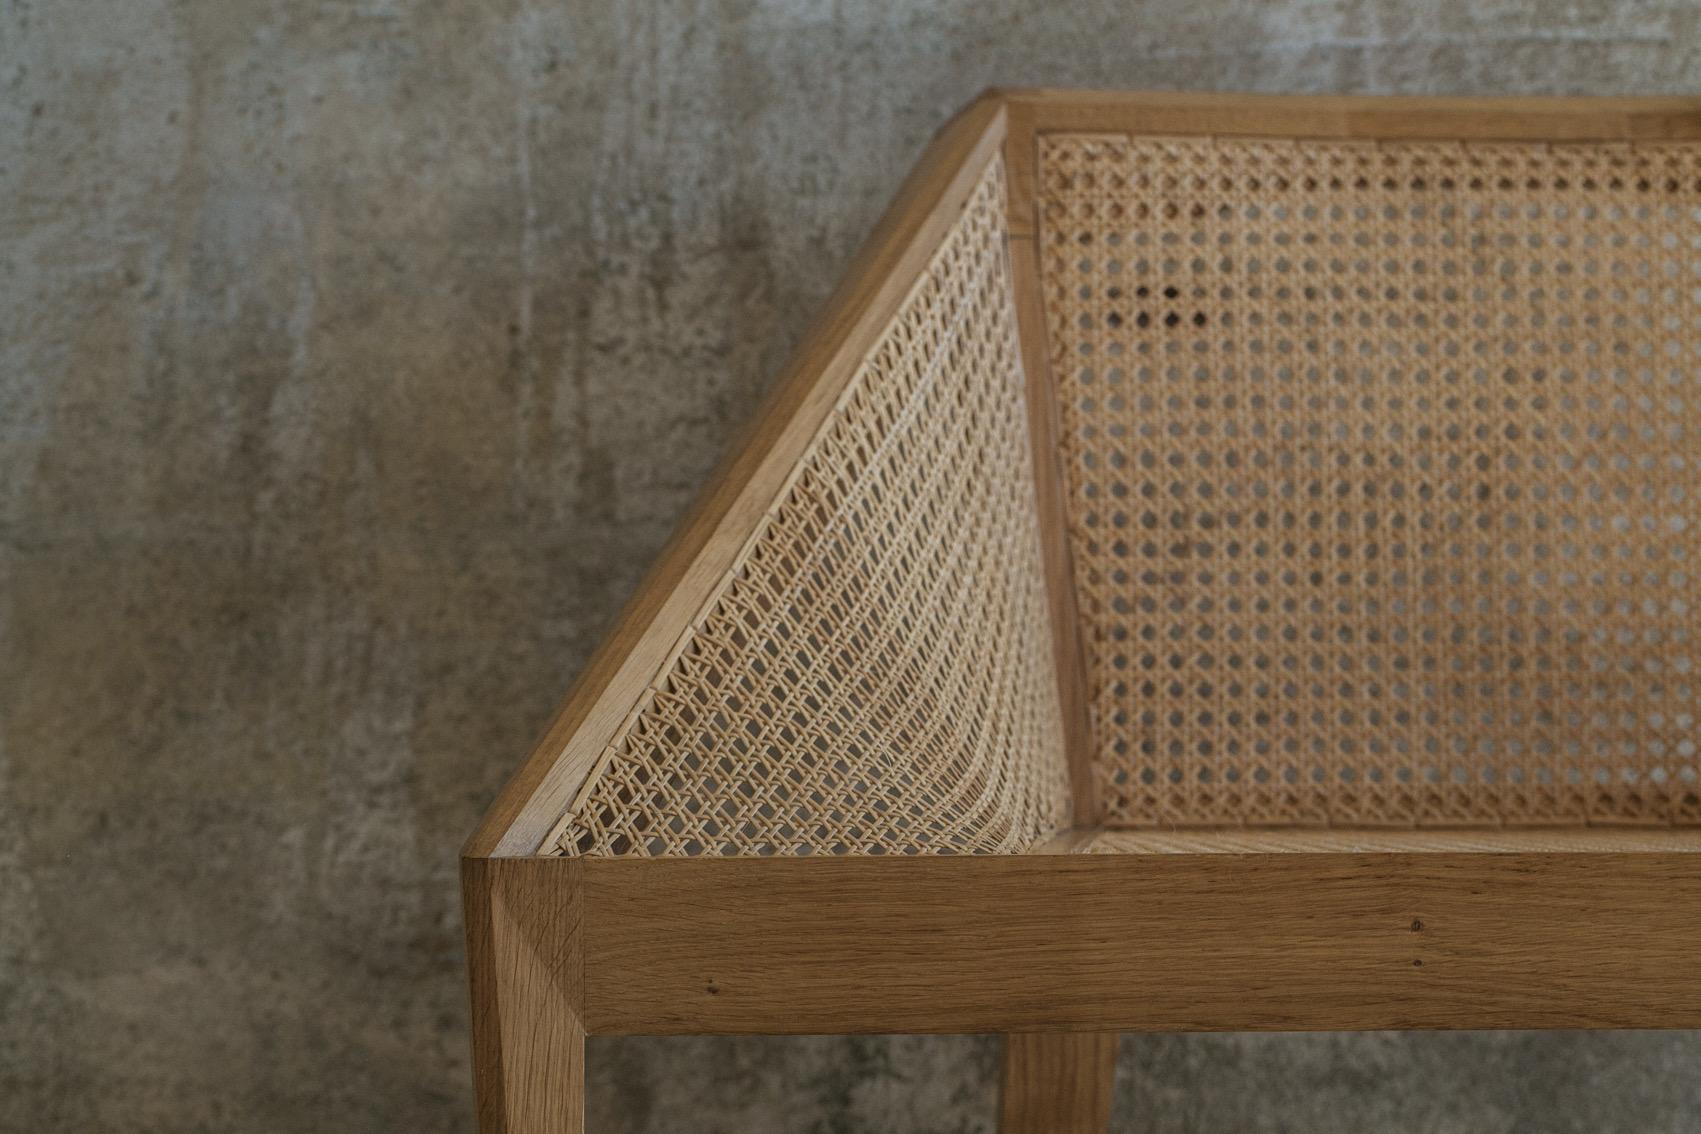 Contemporary Chair 1. Wicker Weave Light and Sculptural Lounge Chair Prototype by Tomaz Viana For Sale